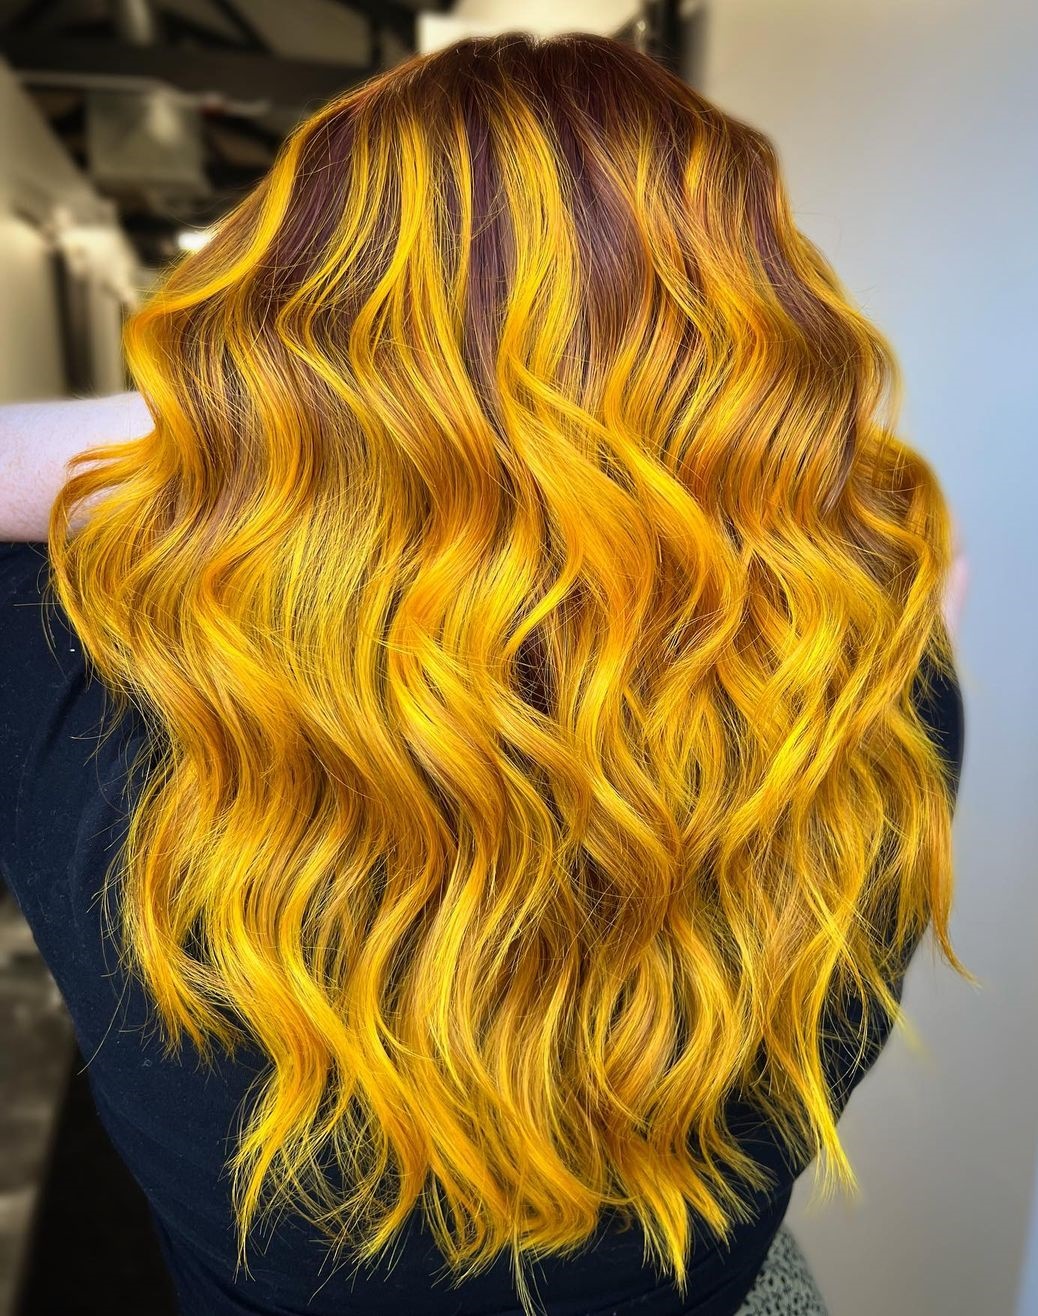 20 Superb Yellow Hair Ideas to Set the New Trend - Hairstylery